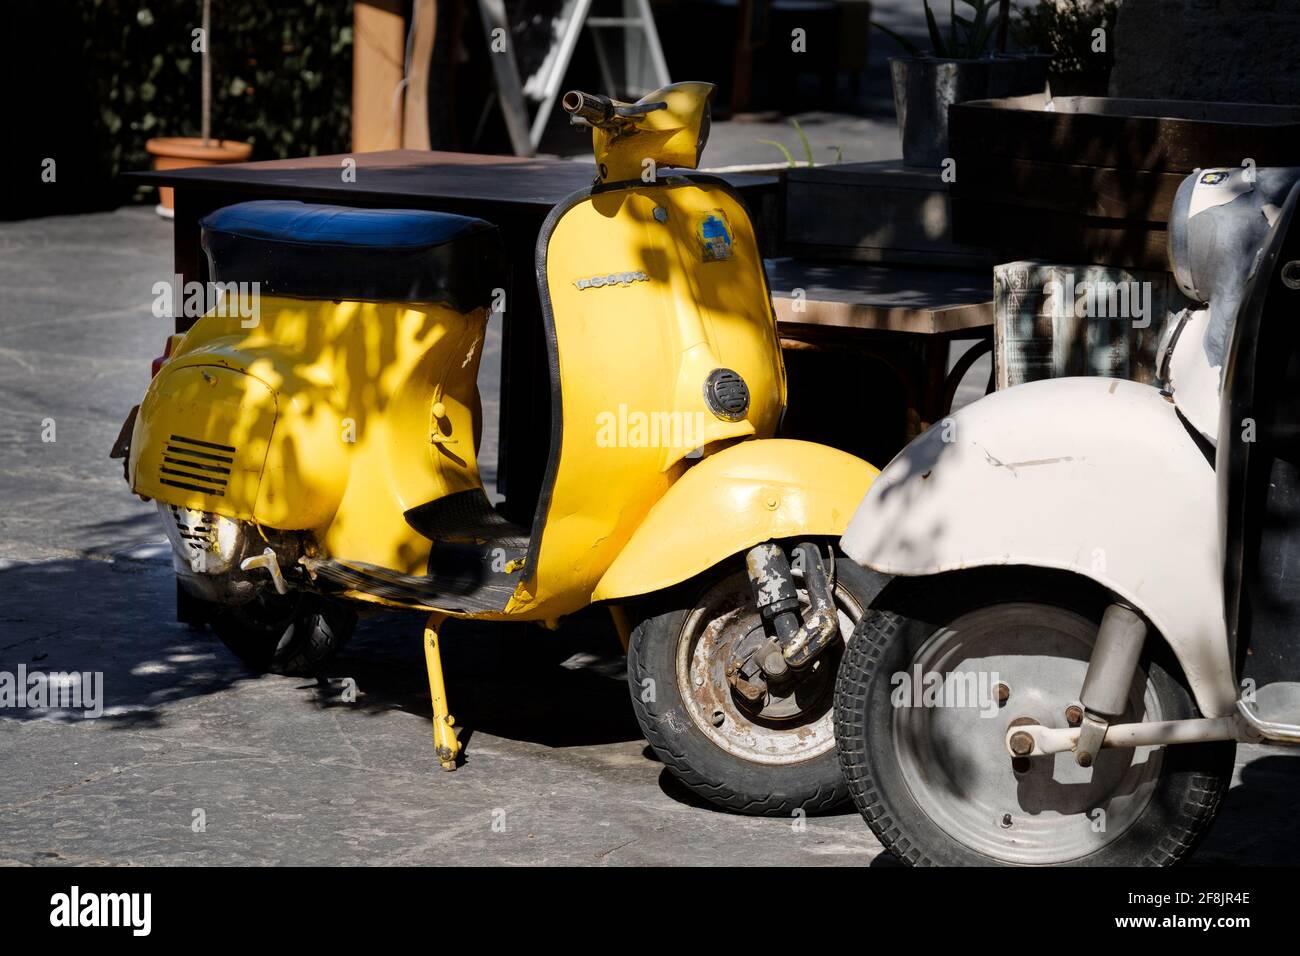 An vintage bright yellow iconic Vespa motor scooter parked up on a street in Rhodes City Old Town on the island of Rhodes, Greece Stock Photo